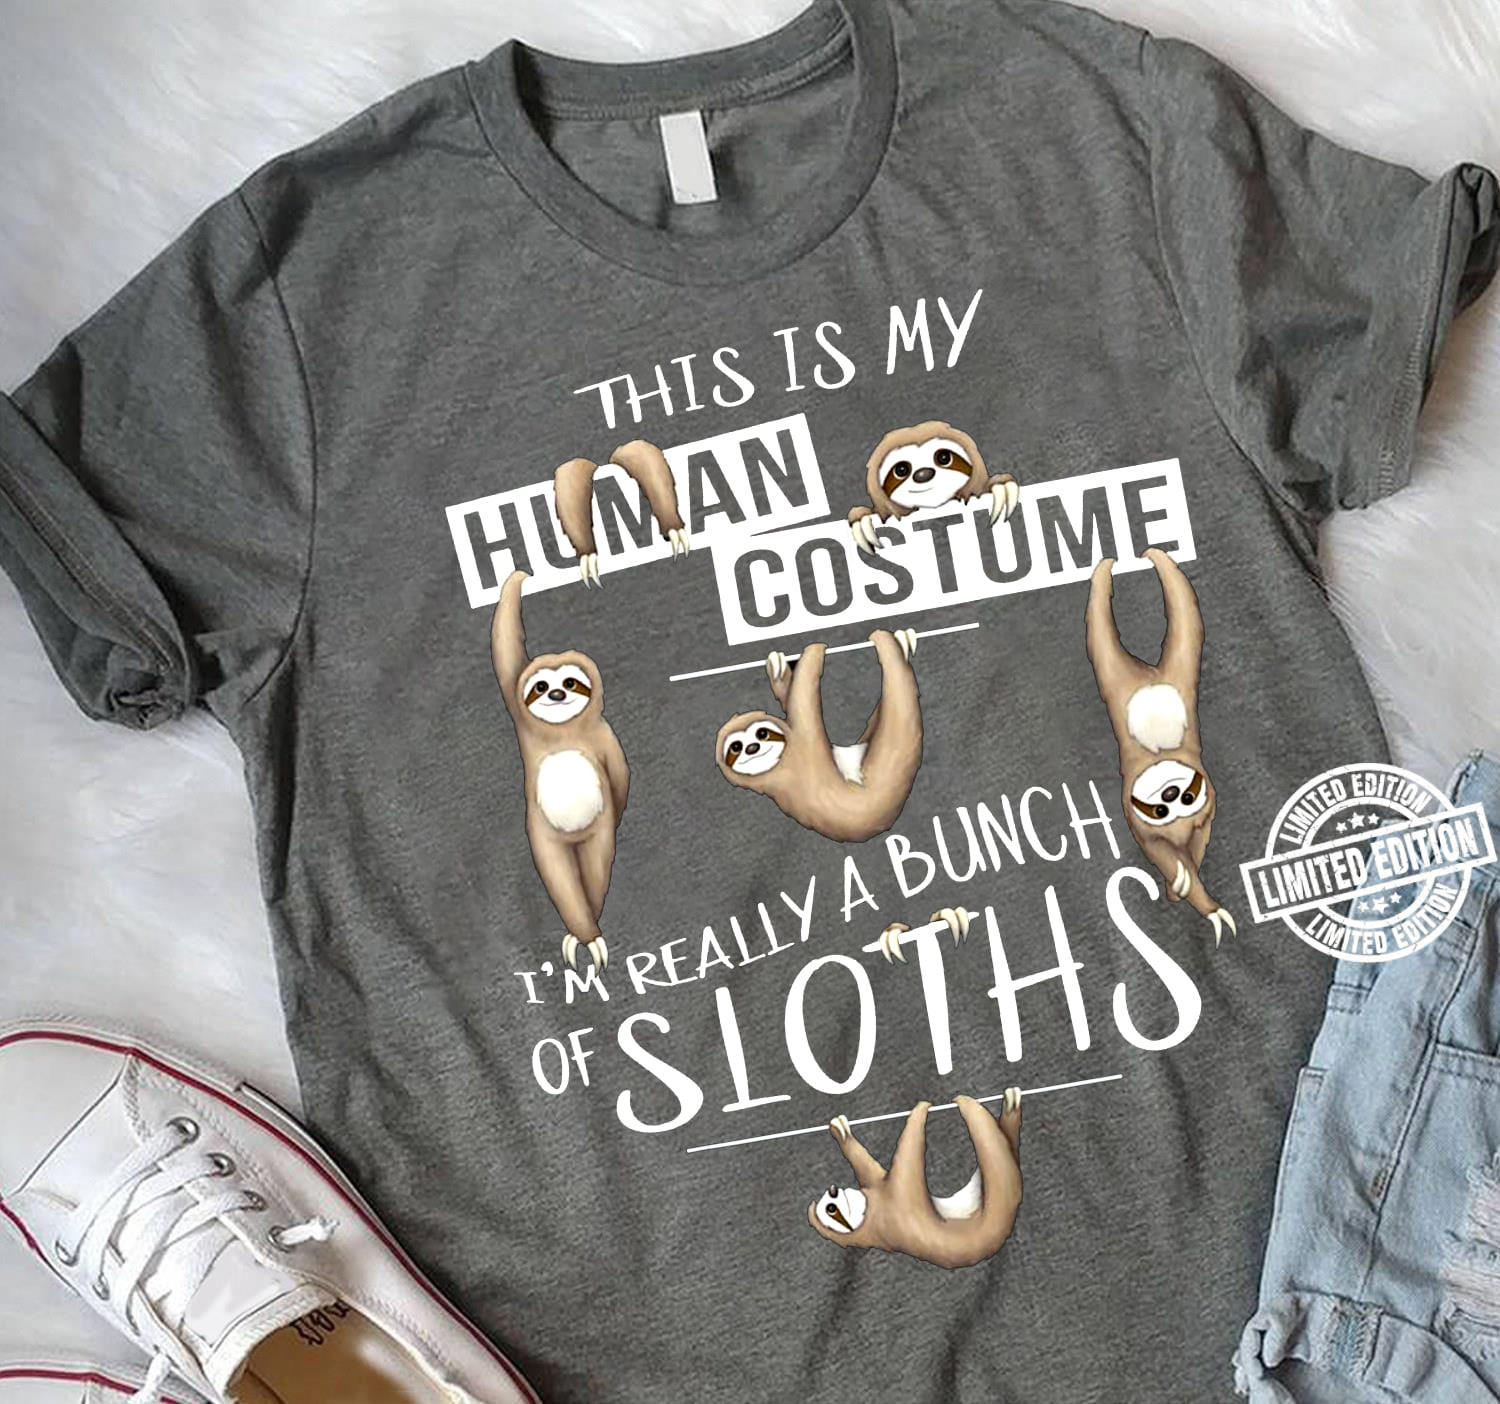 This is my human costume I'm really a bunch of Sloths - Sloth lover